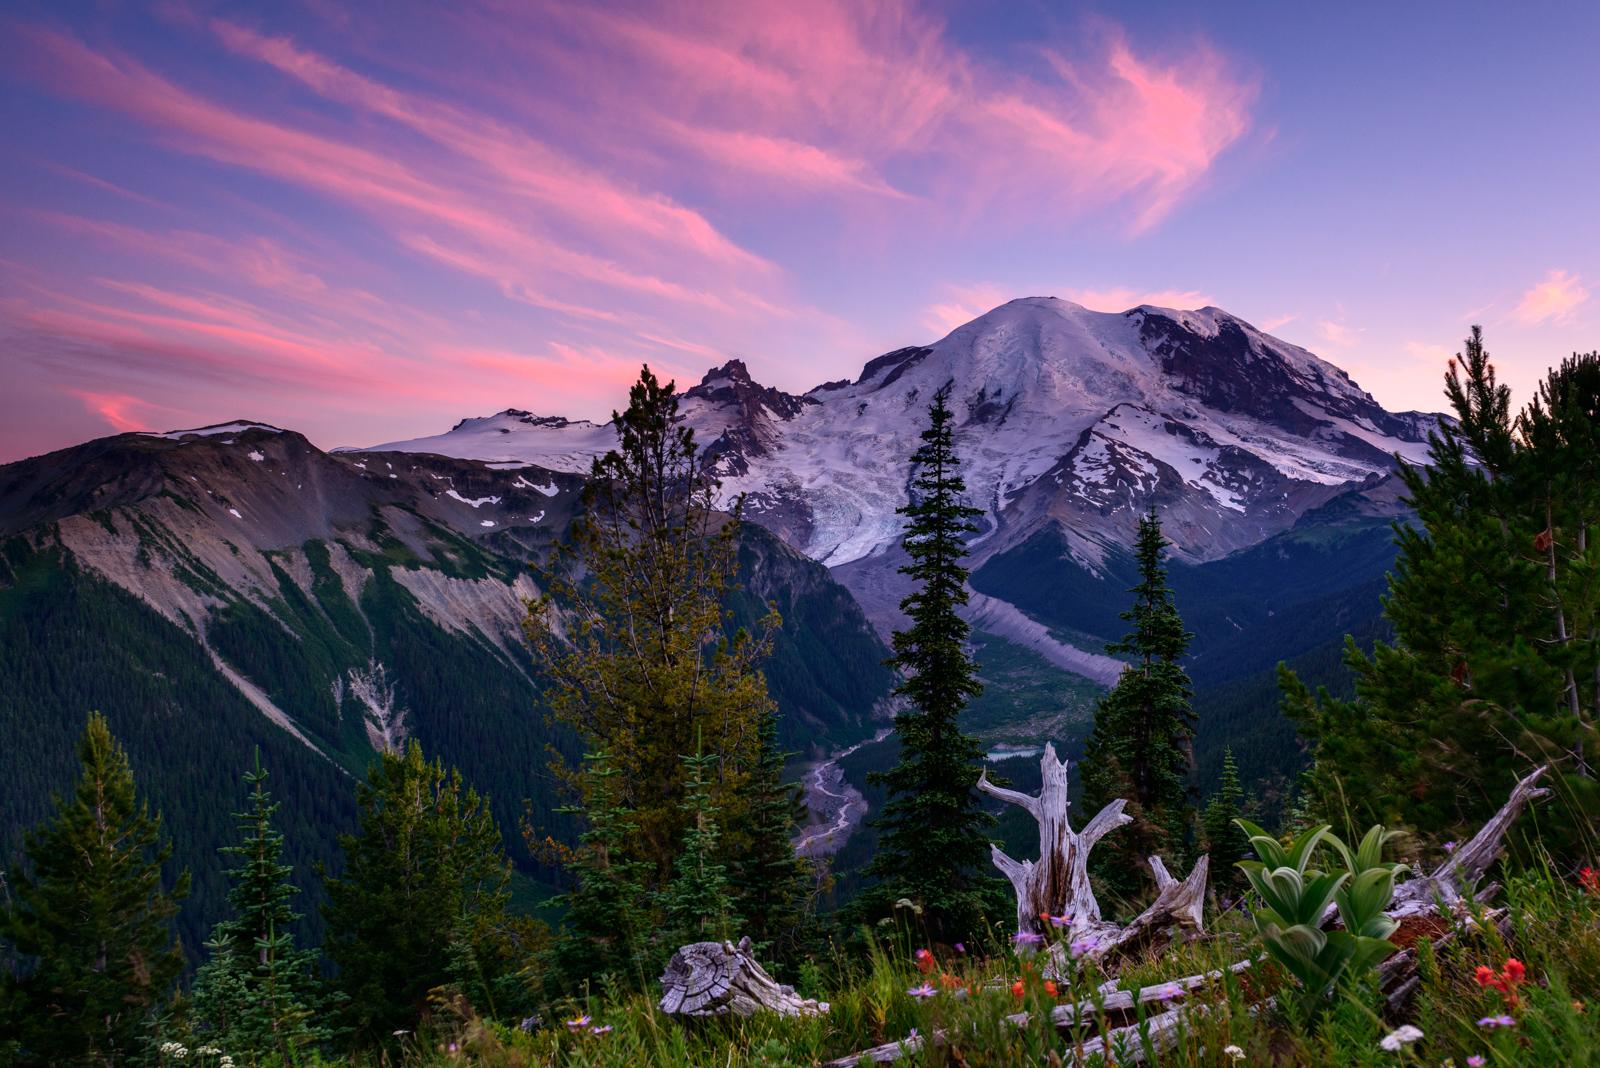 Mount Rainier National Park - Silver Forest Sunset - Credits: JD Hascup Photo